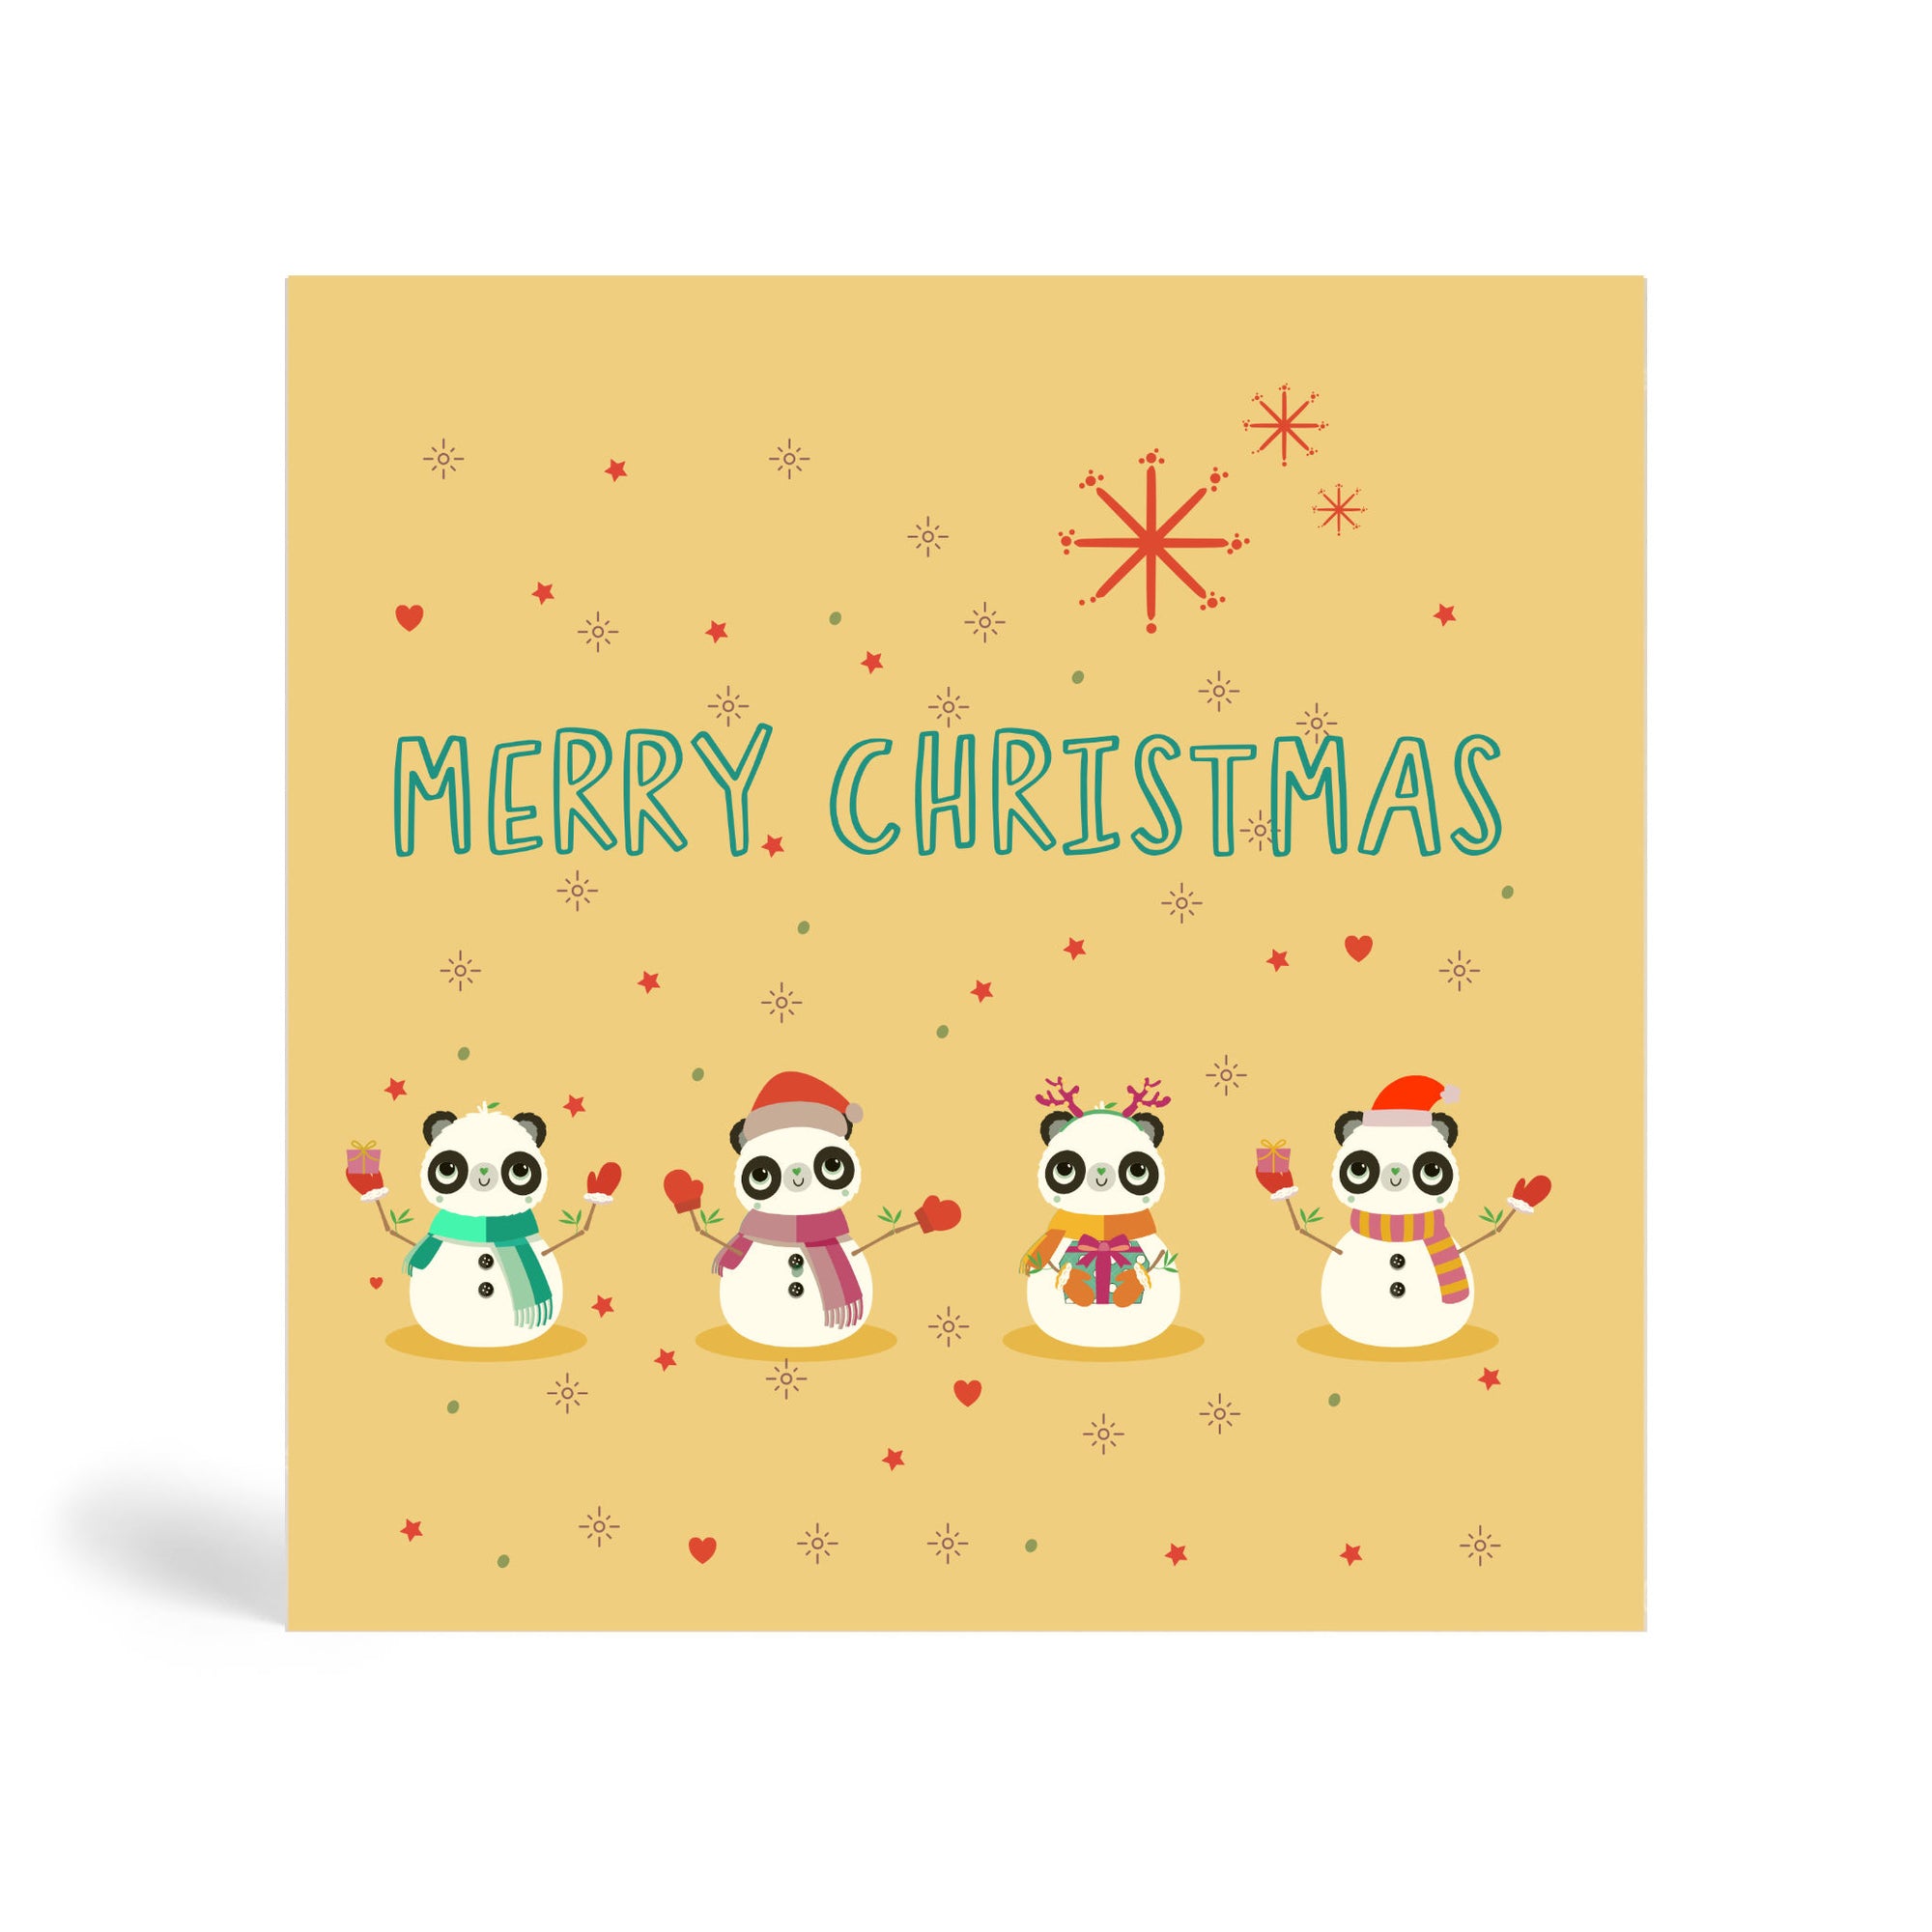 150mm Square Merry Christmas Bamboo Christmas Cards with four panda snowman friends.